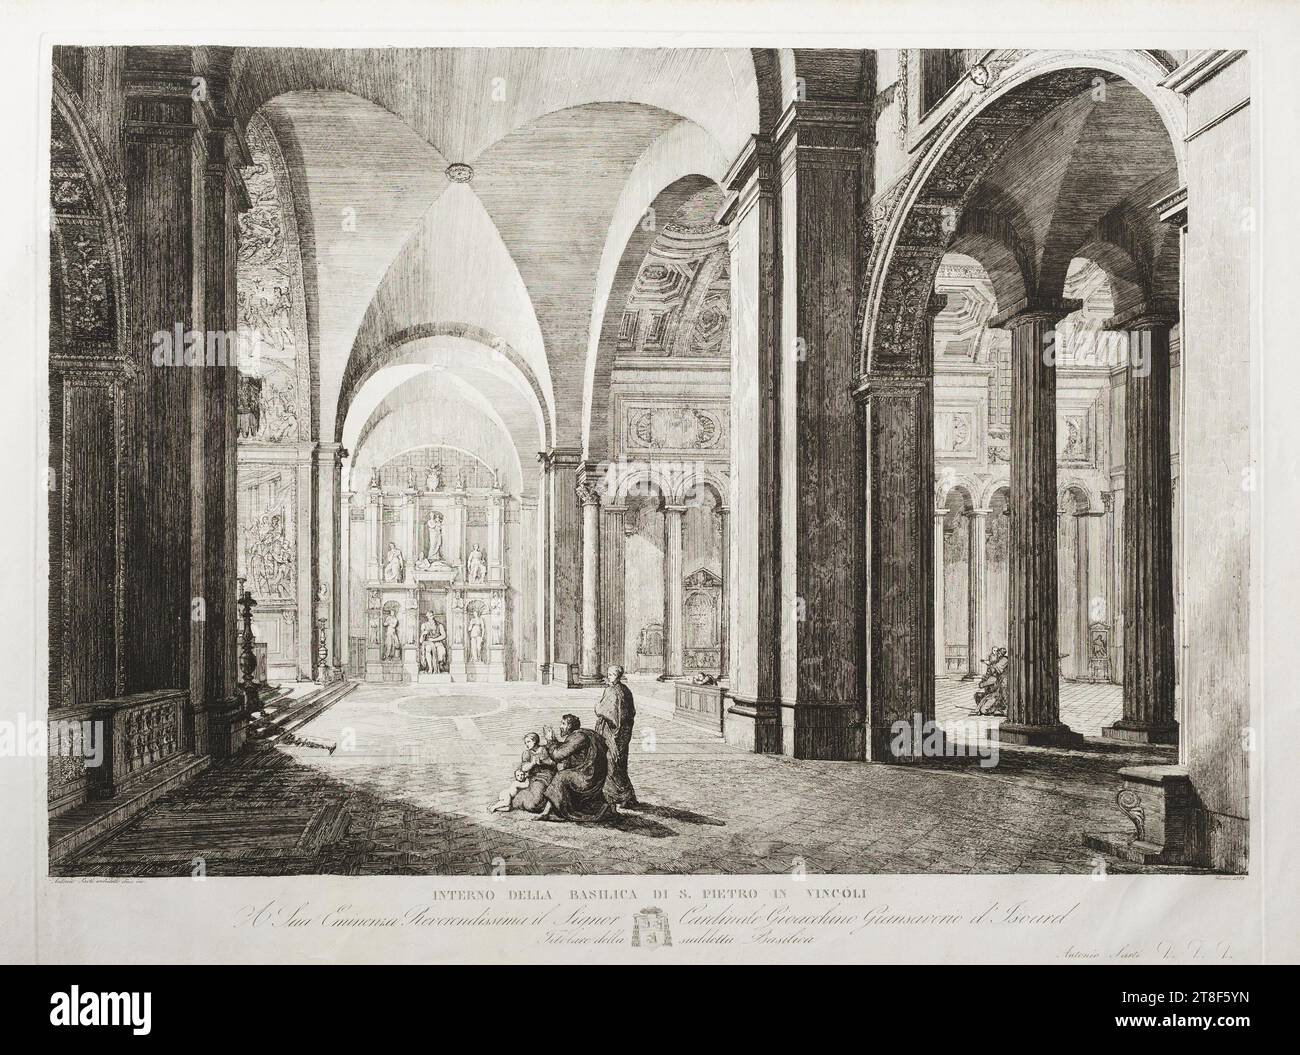 Interior of the church of S. Pietro in Vincoli, Antonio Sarti, 1828, Graphic Art, Etching, Paper, Color, Printer's ink, Etching, Printet, Height (plate size) 536 mm, Height (paper size) 572 mm, Width (plate size) 695 mm, Width (paper size) 810 mm, Verso: Camerlengato di S R C (stempel), Graphic Design, European, Modernity (1800 - 1914 Stock Photo